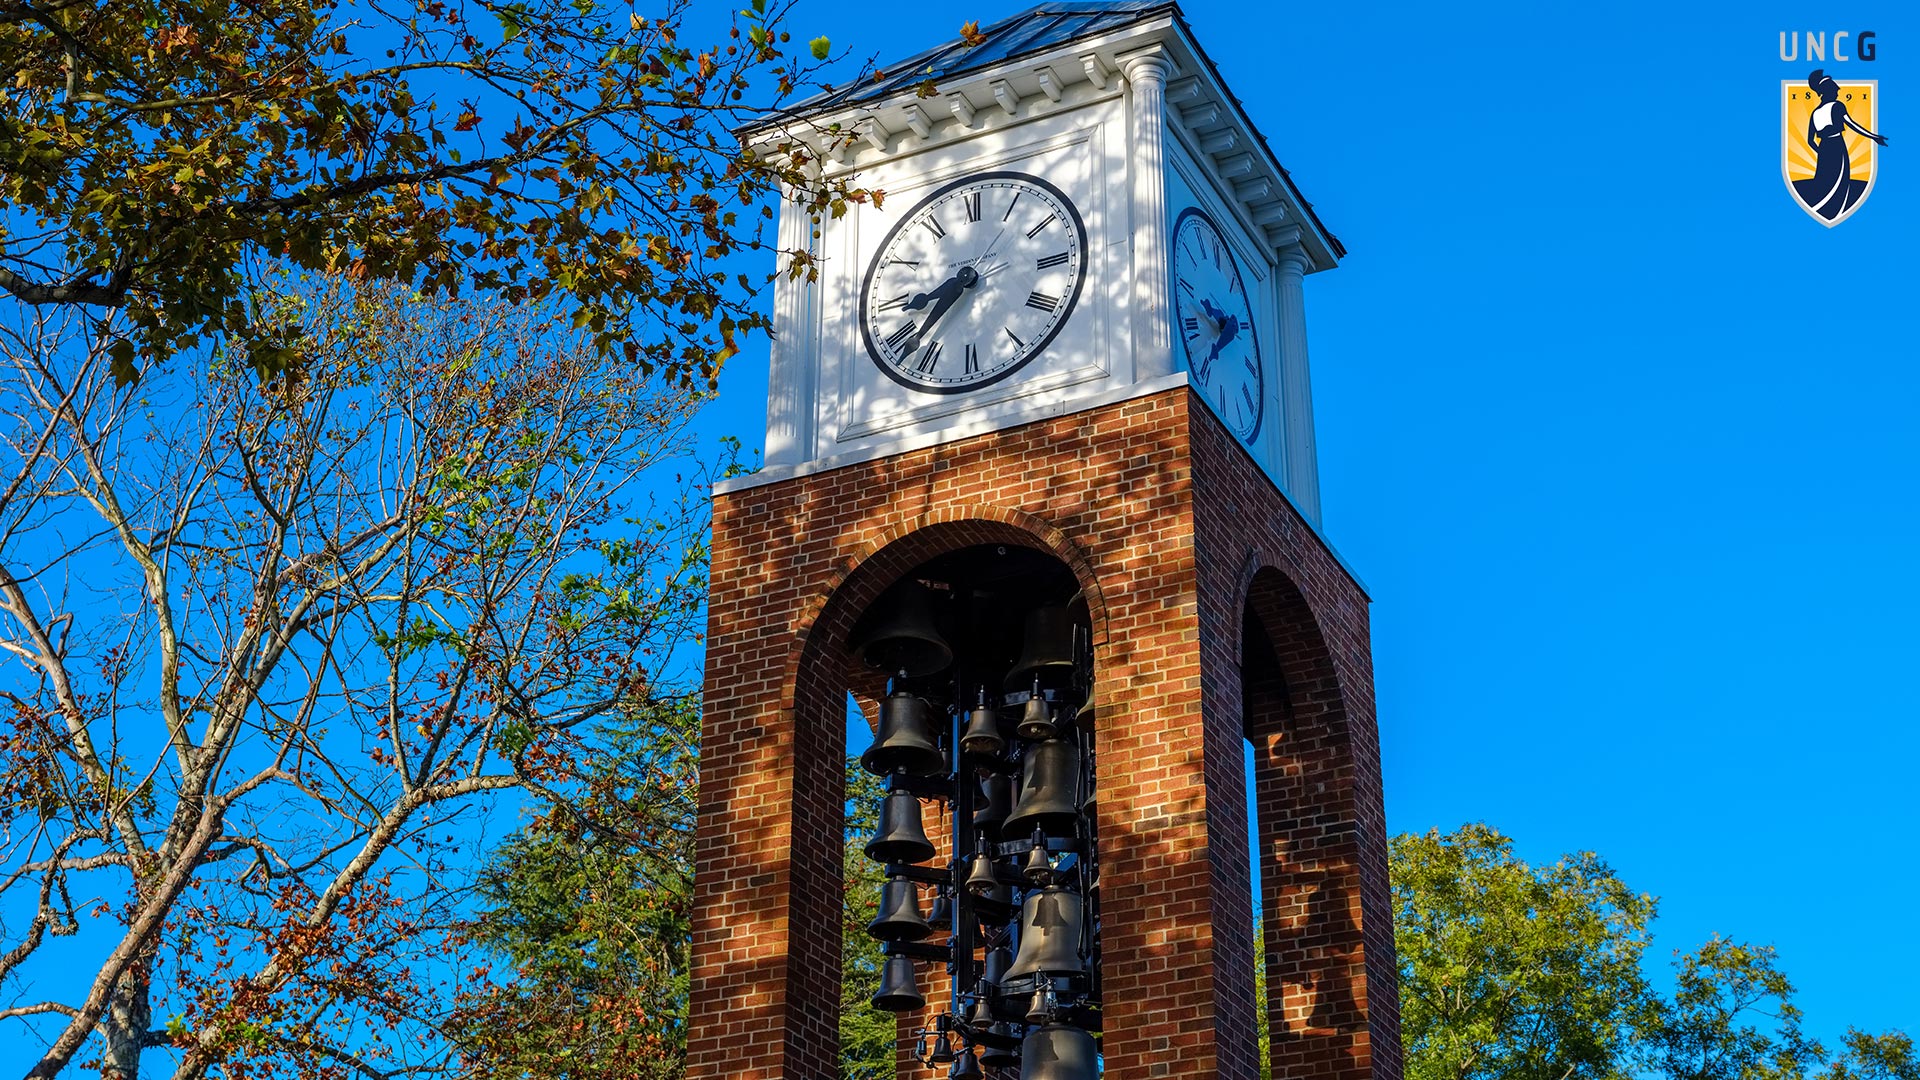 The UNCG Bell Tower against a blue sky with the UNCG logo in the top right corner